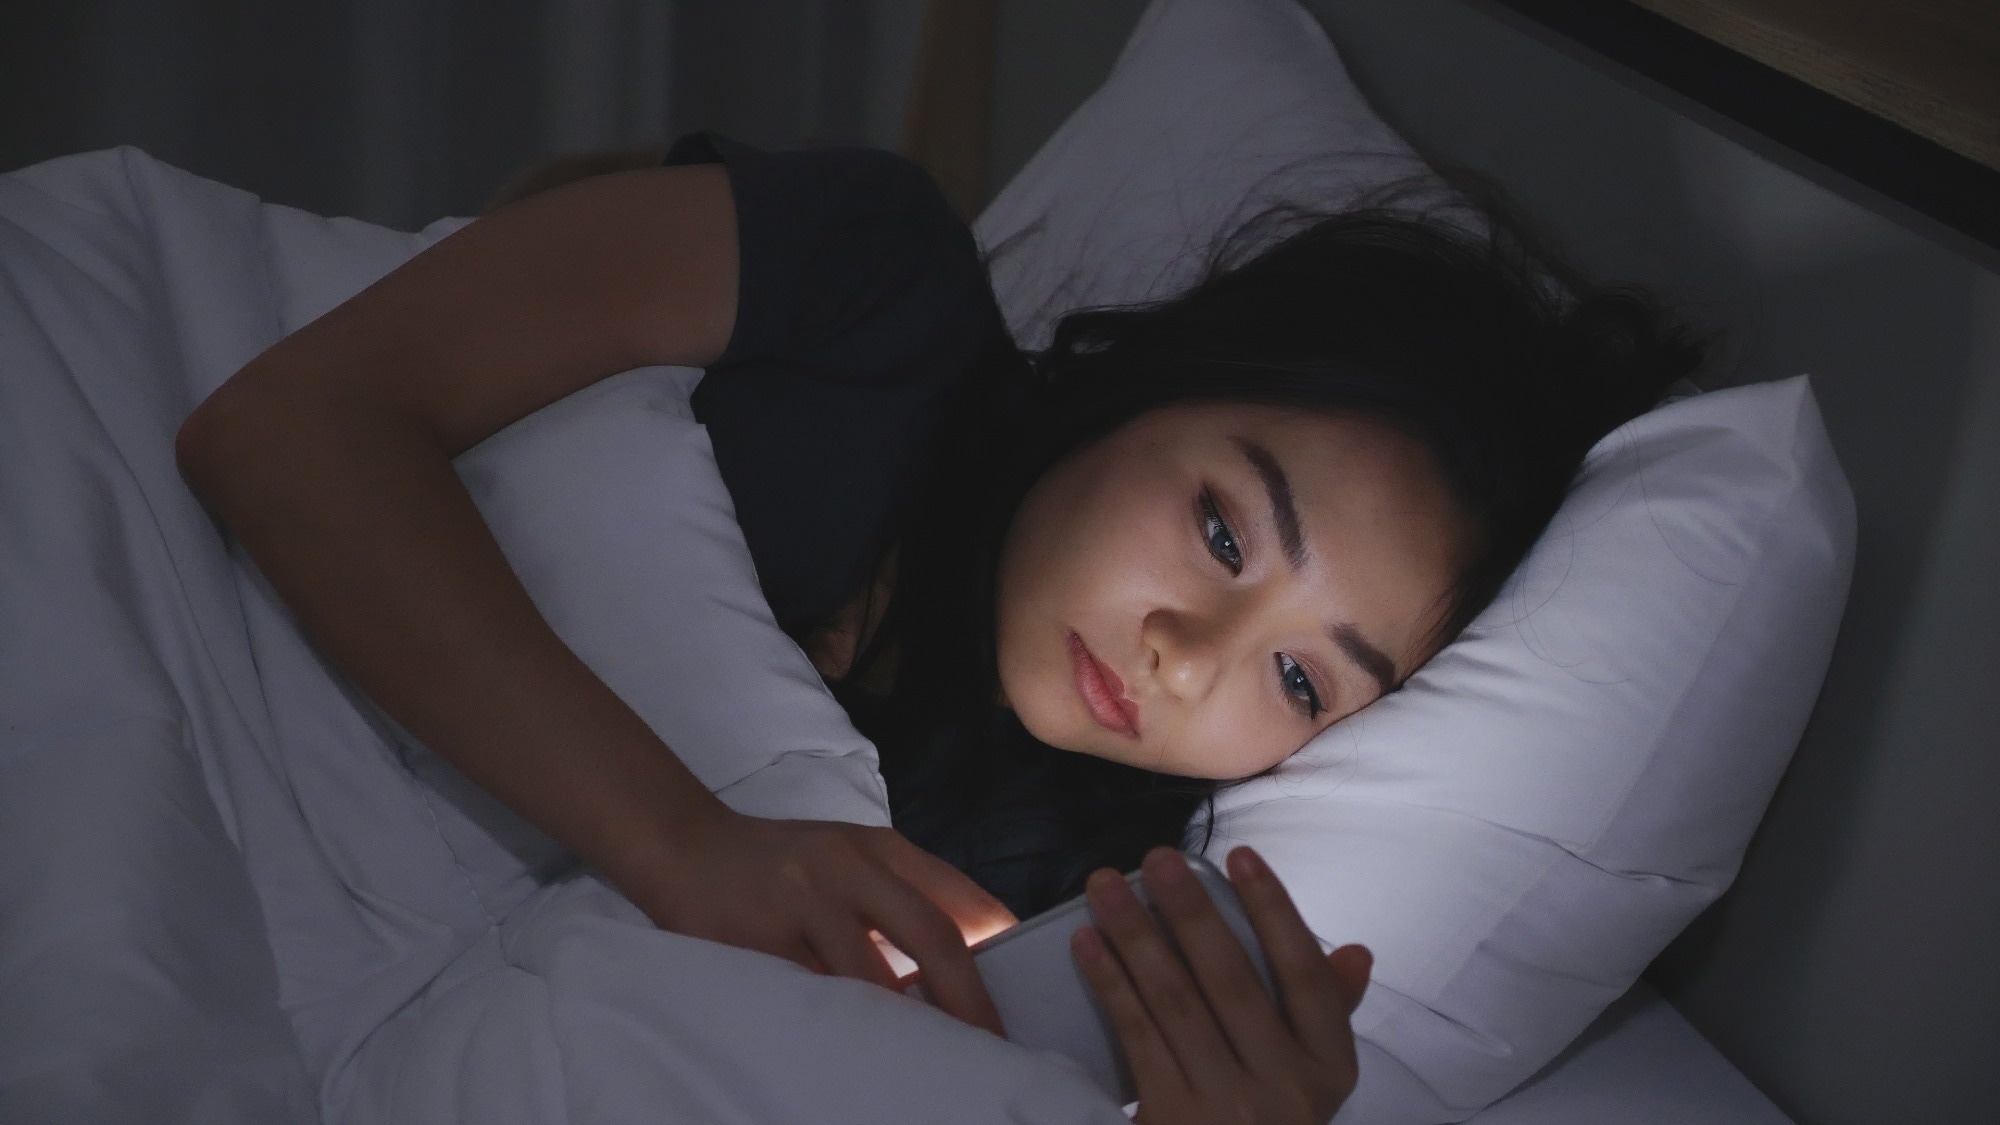 Study: Sleep Duration, Mental Health, and Increased Difficulty Doing Schoolwork Among High School Students During the COVID-19 Pandemic. Image Credit: Rapeepat Pornsipak / Shutterstock